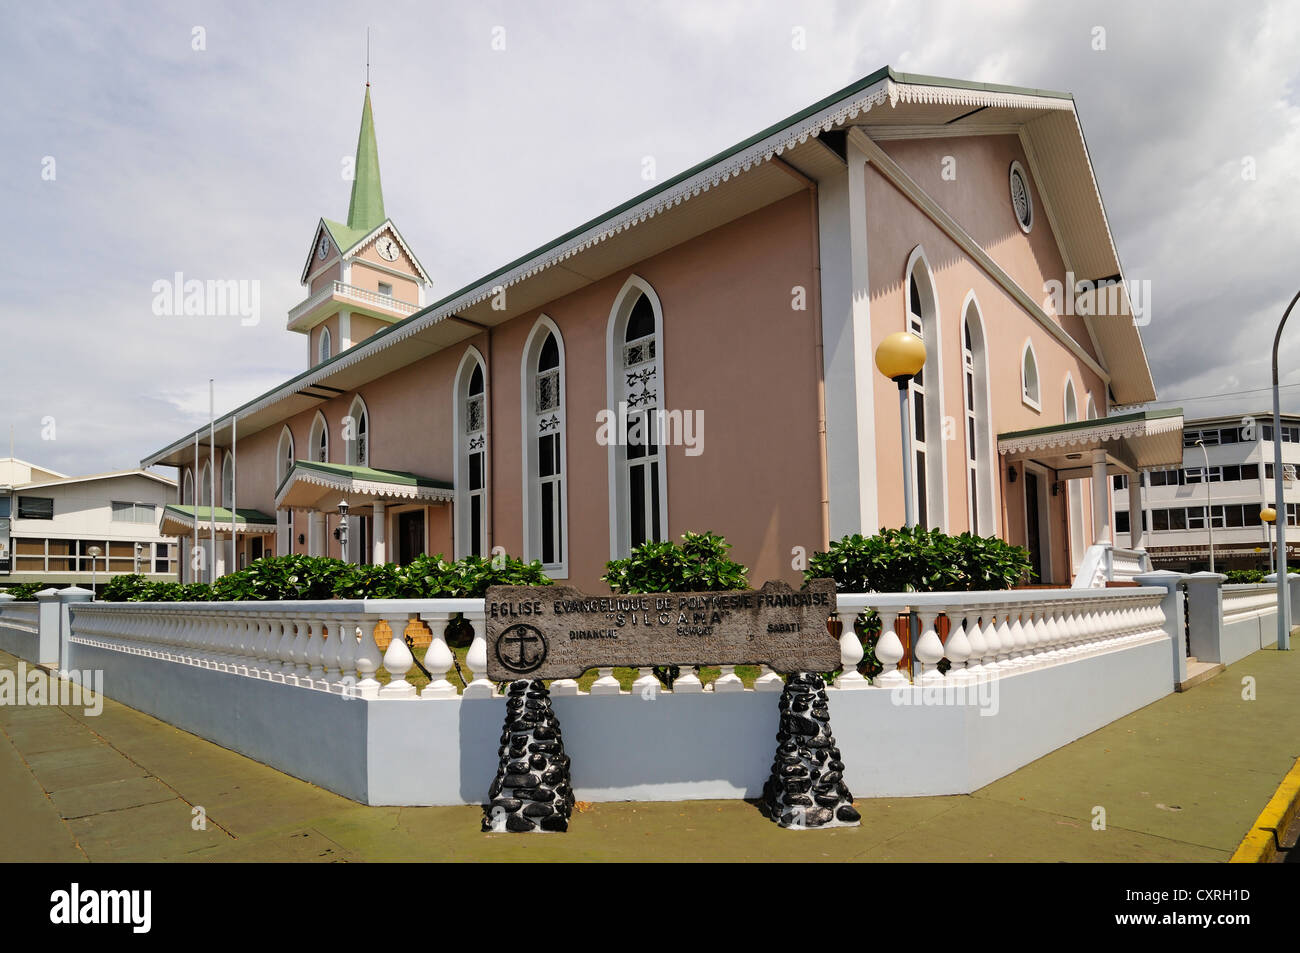 Protestant church in Papeete, Tahiti, Society Islands, French Polynesia, Pacific Ocean Stock Photo